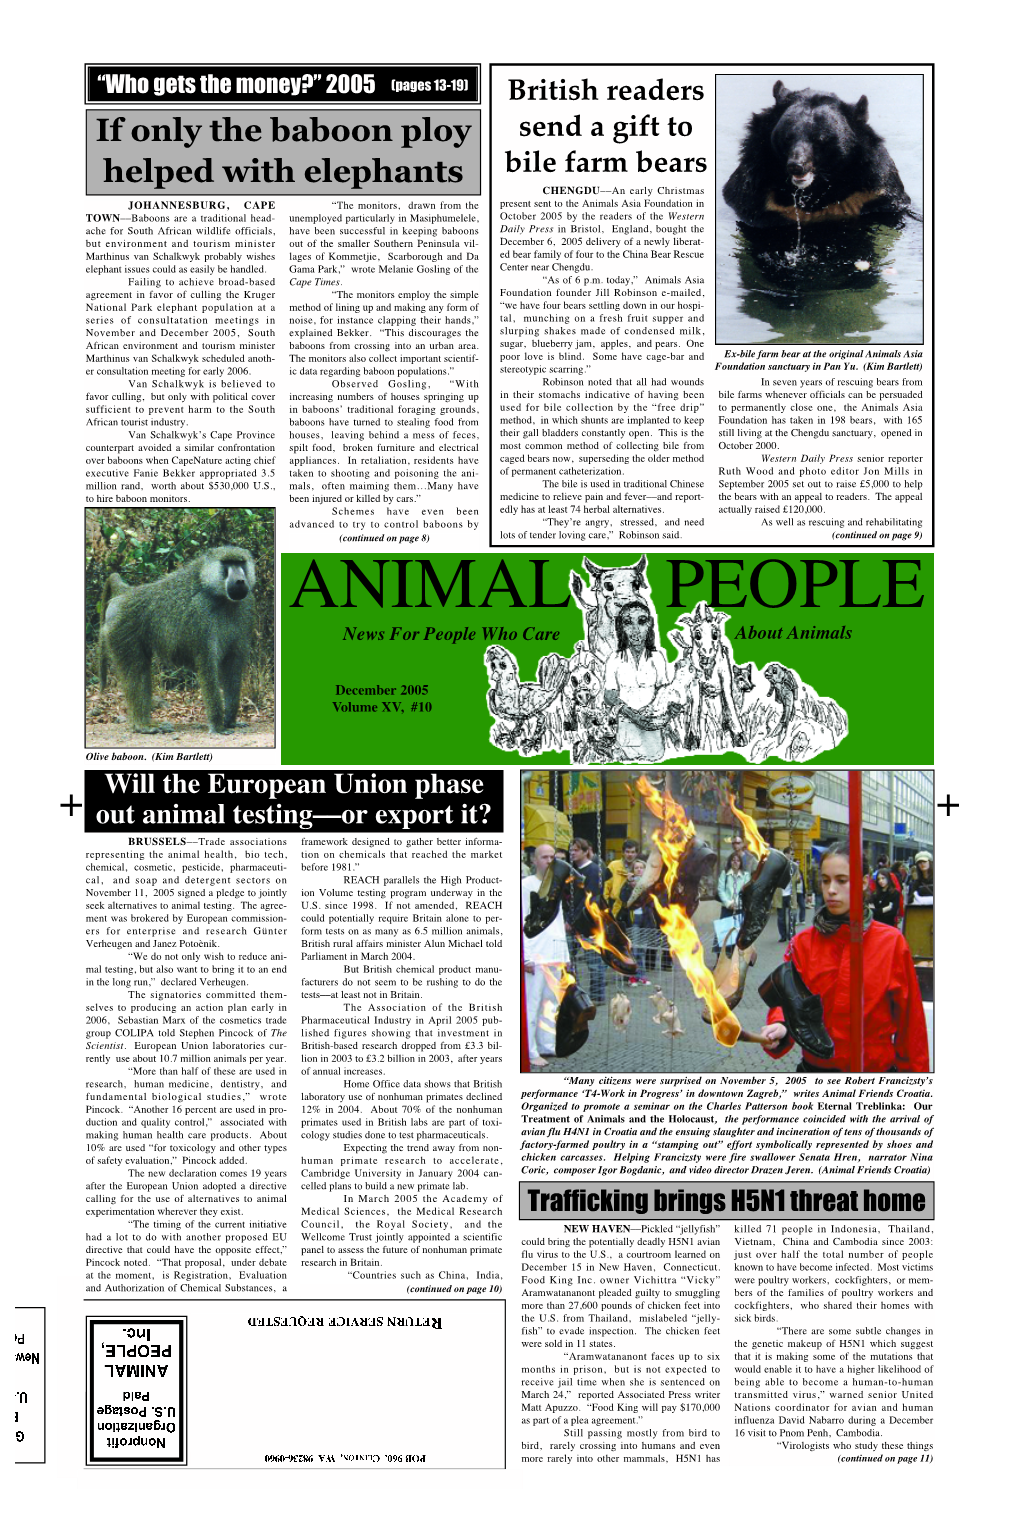 ANIMAL PEOPLE News for People Who Care About Animals